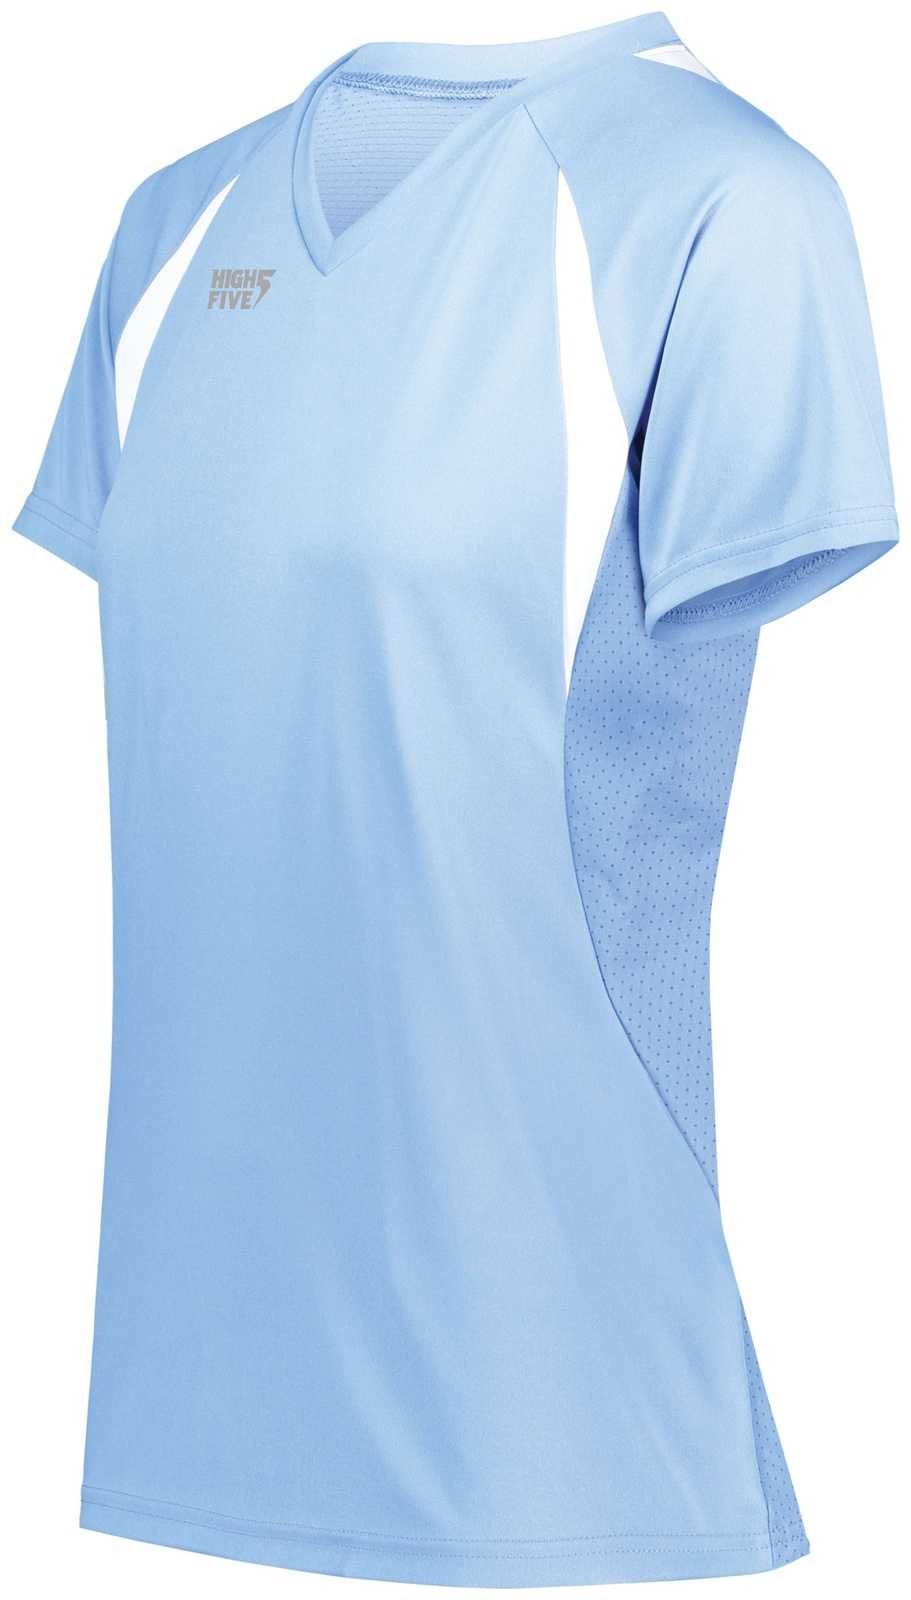 High Five 342233 Girls Color Cross Jersey - Columbia Blue White - HIT a Double